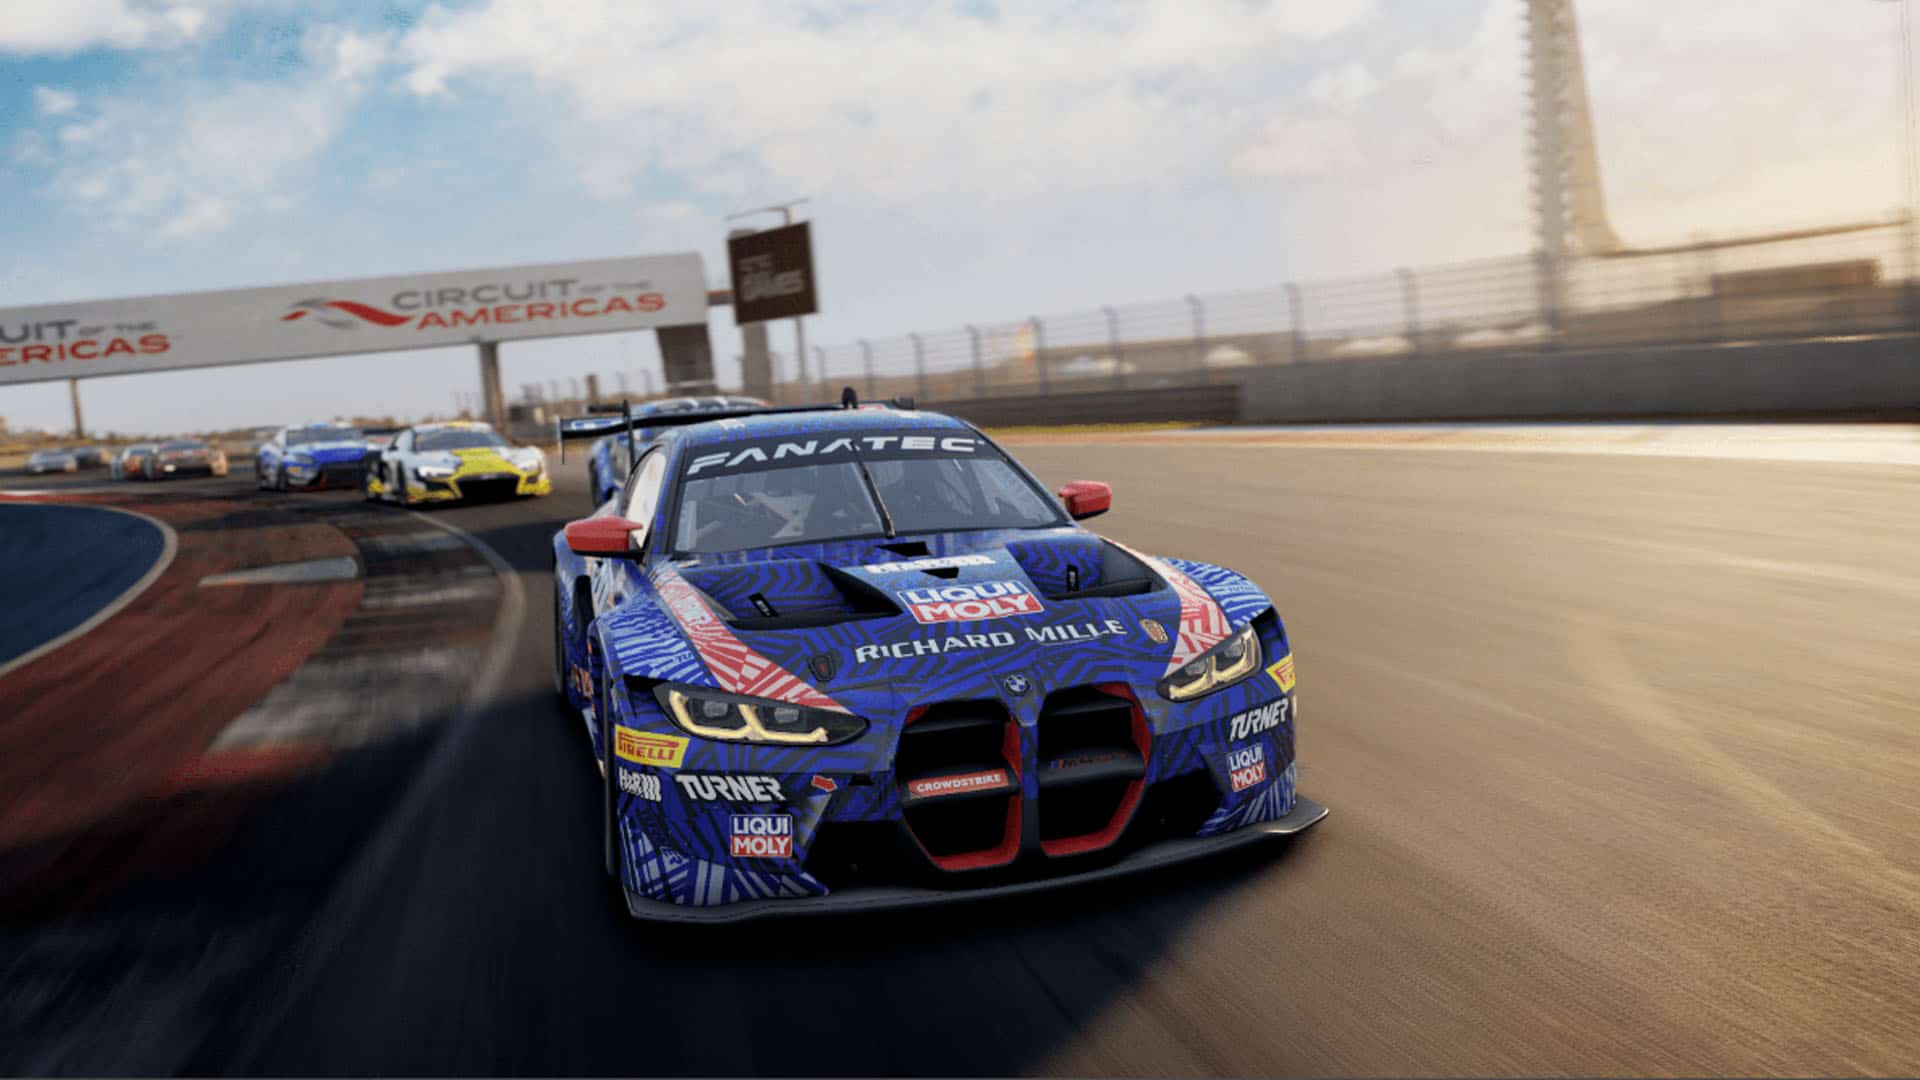 Assetto Corsa Competizione on PS5 is now better than ever